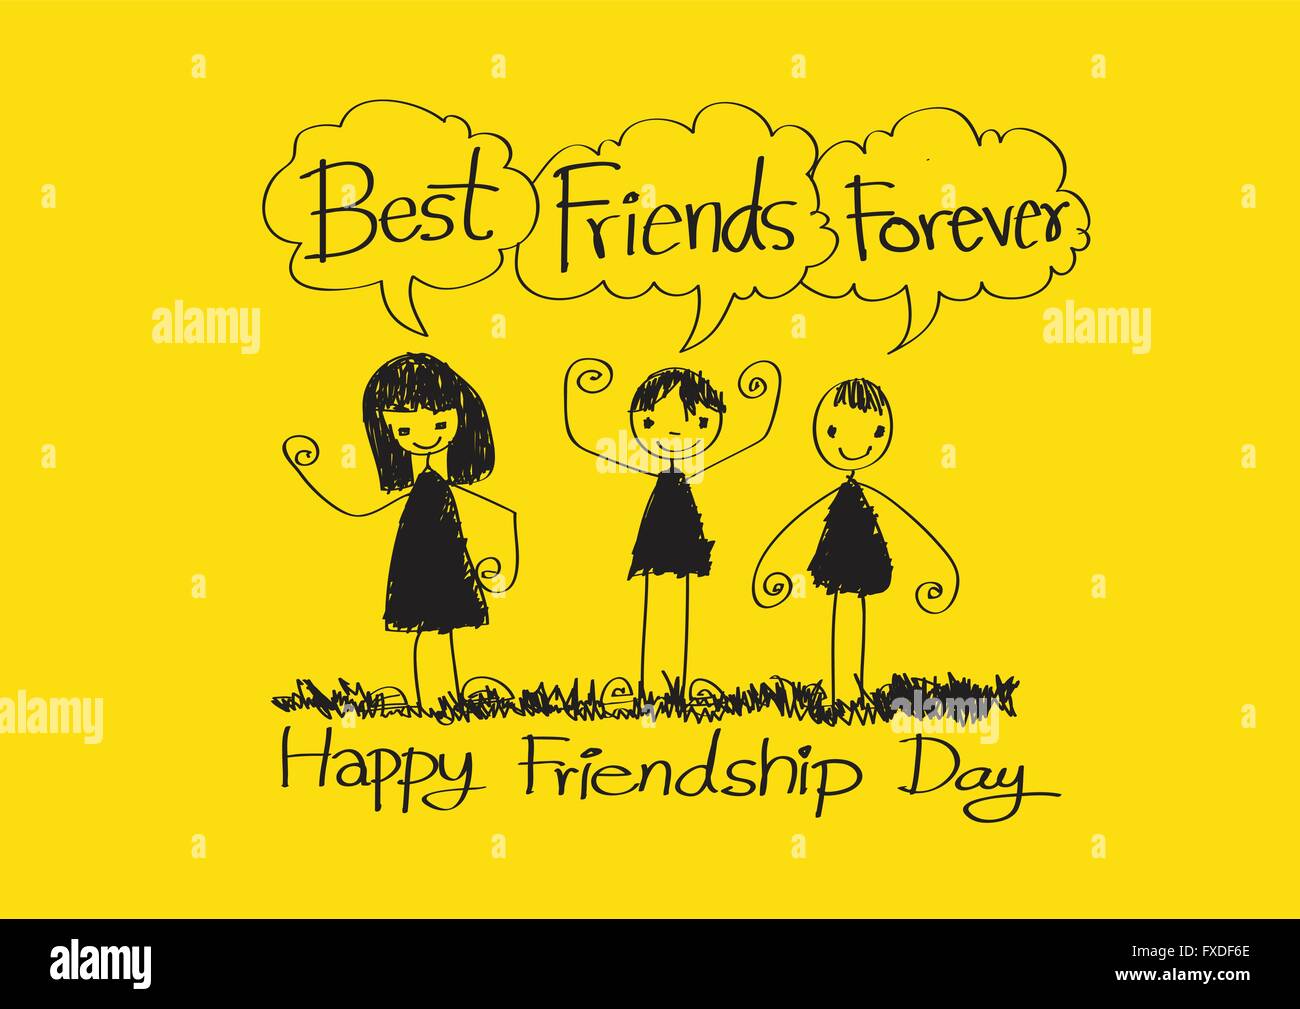 Happy Friendship Day and Best Friends Forever idea design Stock ...